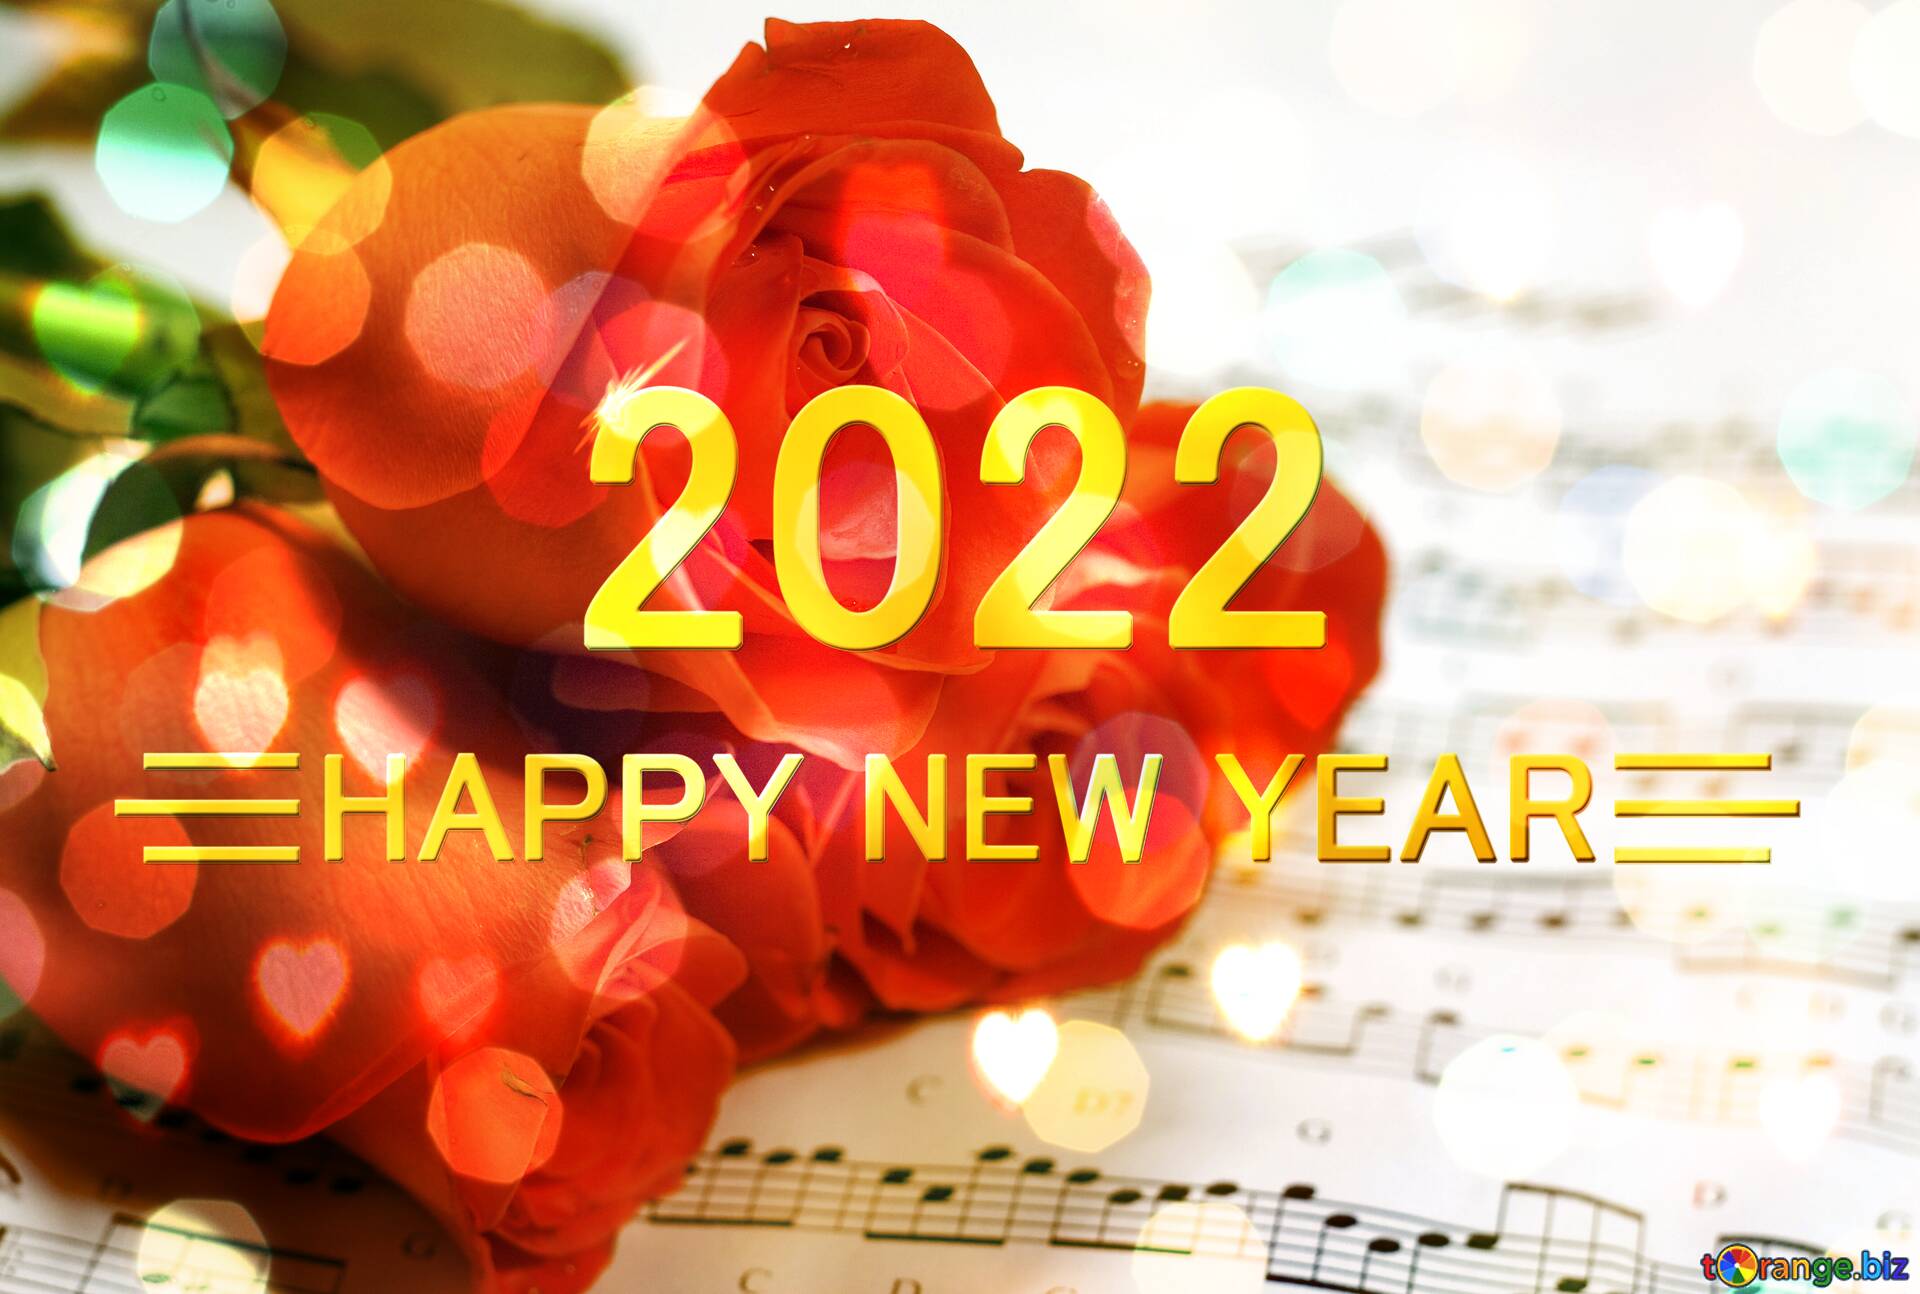 Download free picture Music flower Card Background Happy New Year 2022 on  CC-BY License ~ Free Image Stock  ~ fx №212575